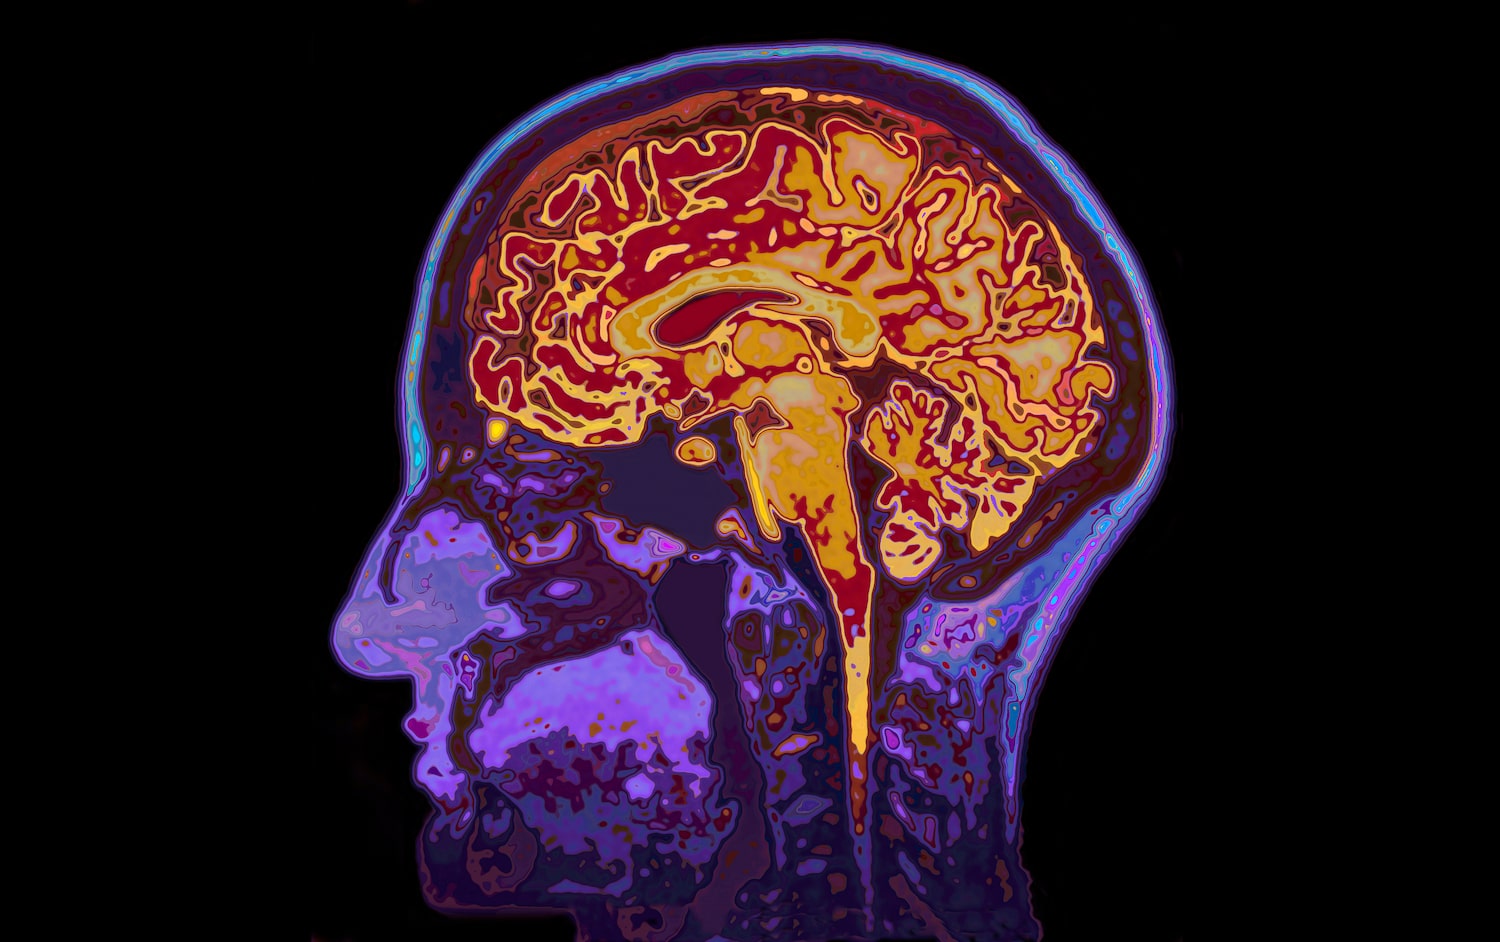 a side profile view of a human brain scan, colored in orange and purple. you can see the various lobes and folds of the brain